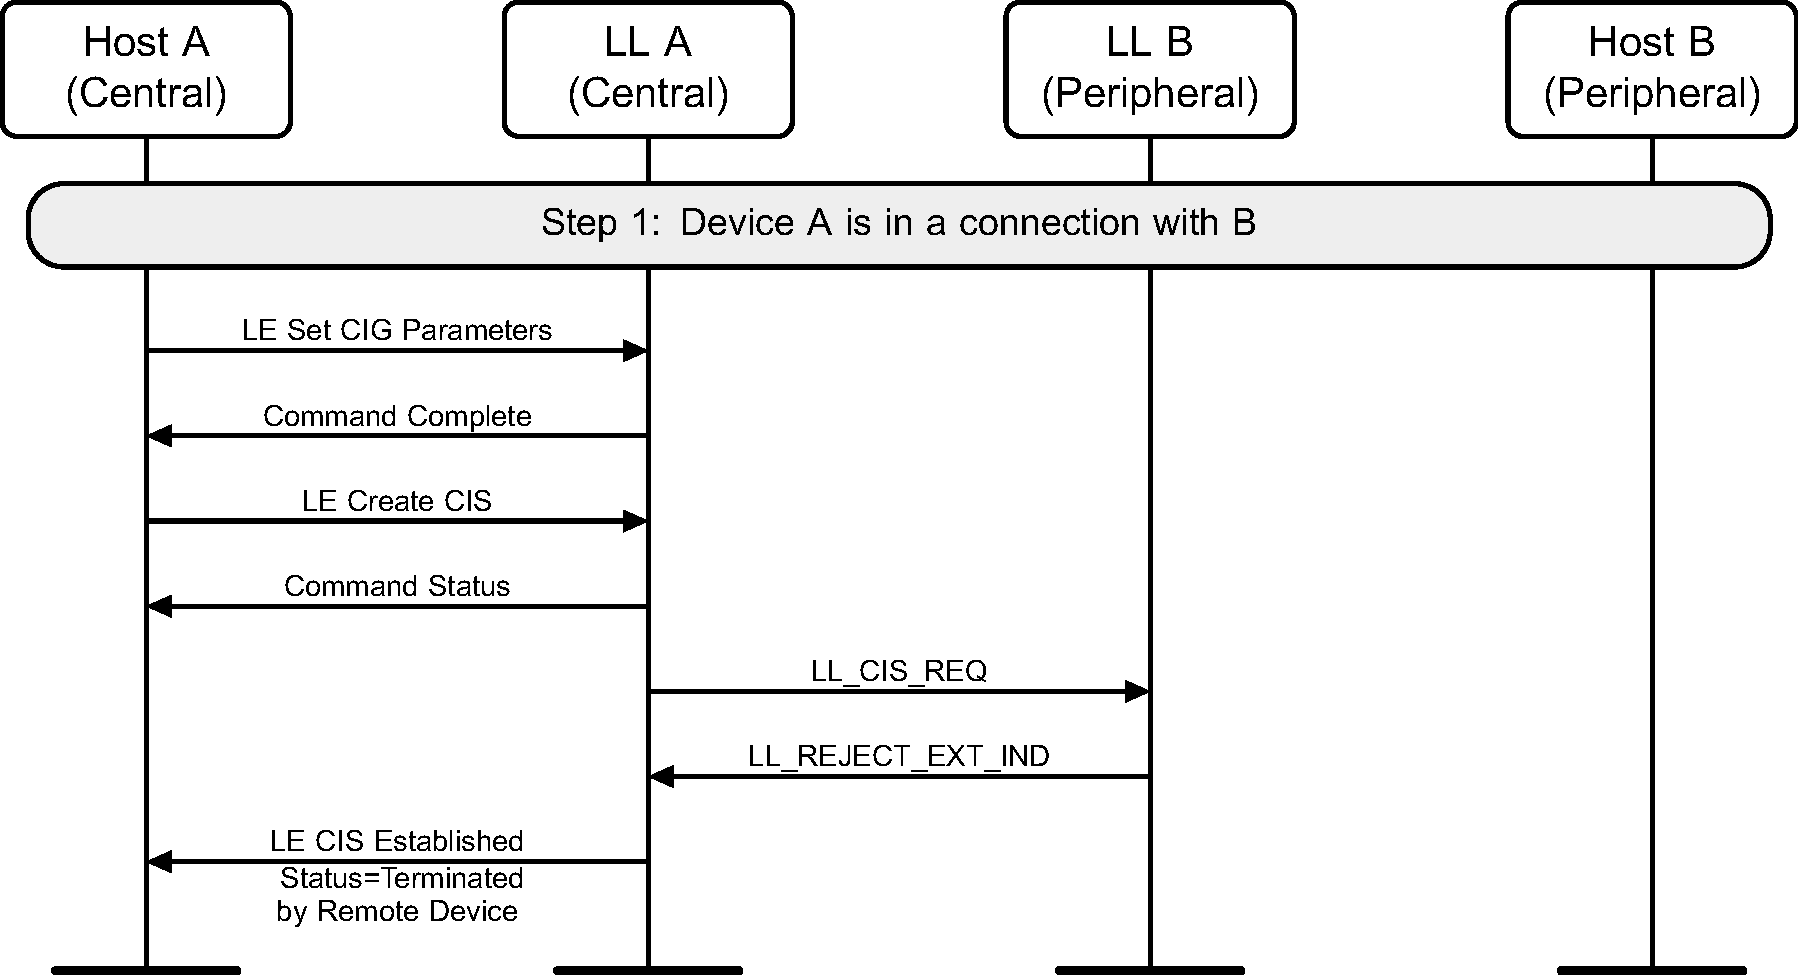 The Link Layer in Device B rejects a CIS request from Device A